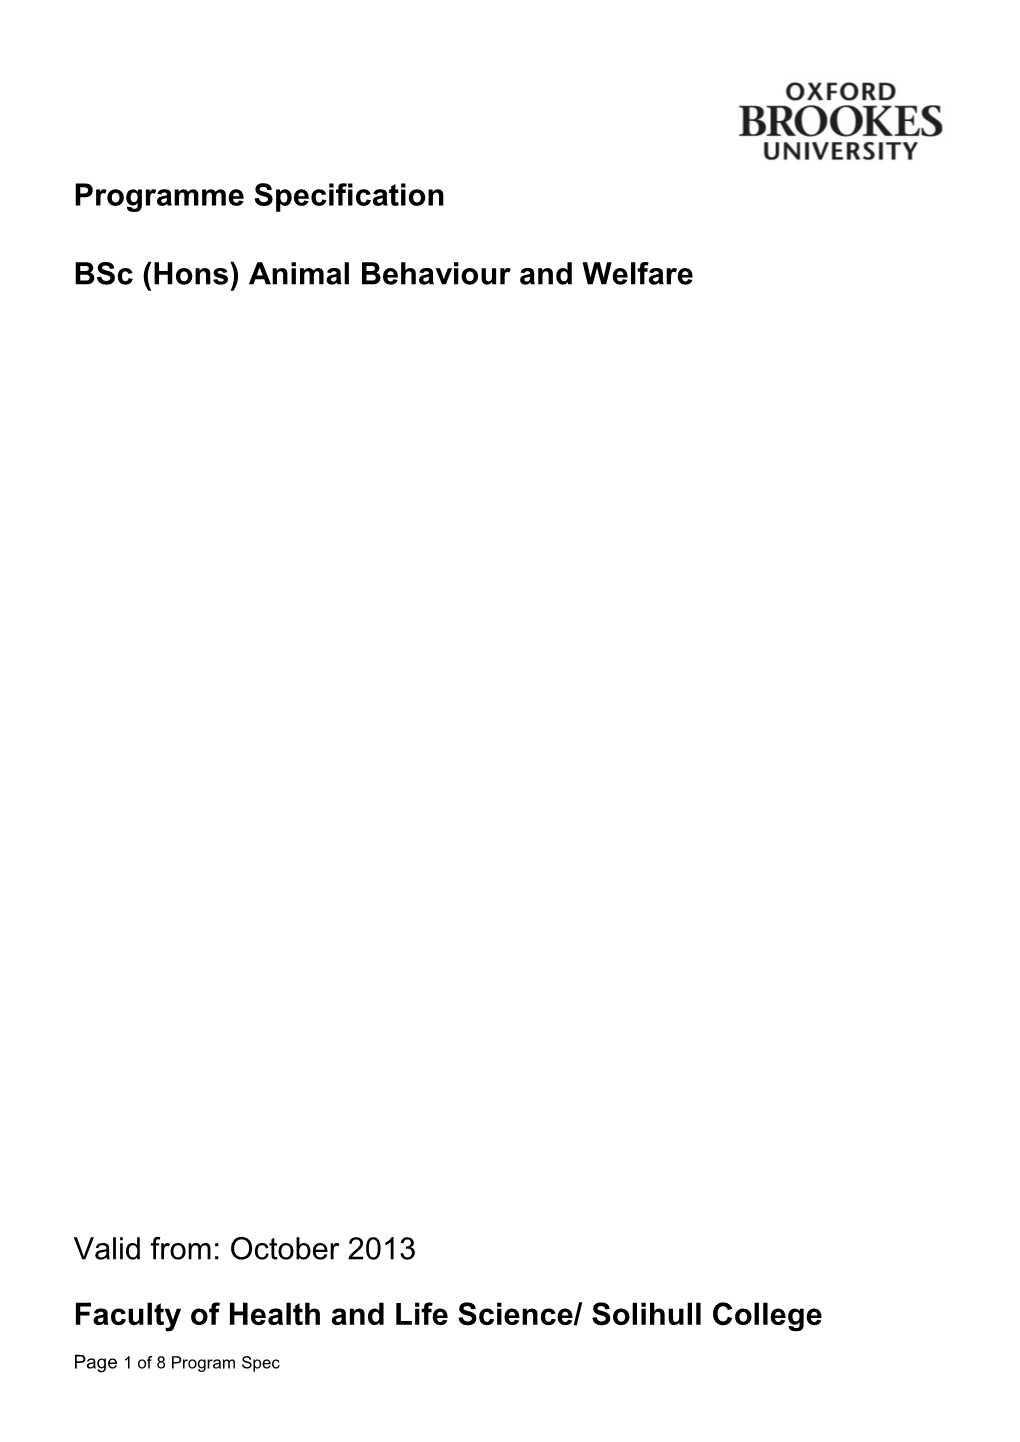 Programme Specification Bsc (Hons) Animal Behaviour and Welfare Valid From